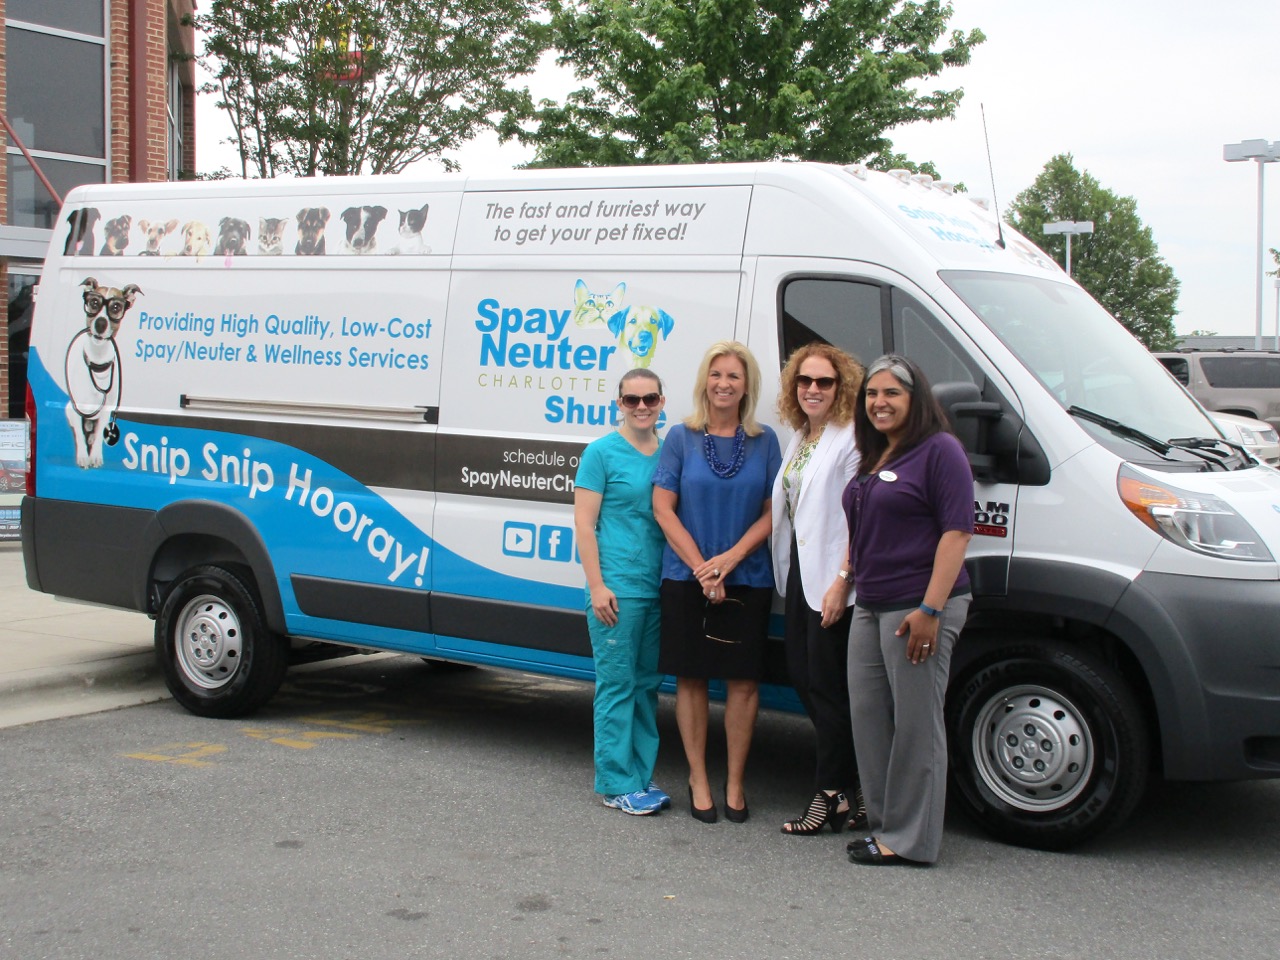 Photo (left to right): Spay Neuter Charlotte's medical director, Elizabeth Welch; Robin Smith Salzman; Spay Neuter Charlotte founder Cary Bernstein; Billie Richardson, business and HR manager at Spay Neuter Charlotte